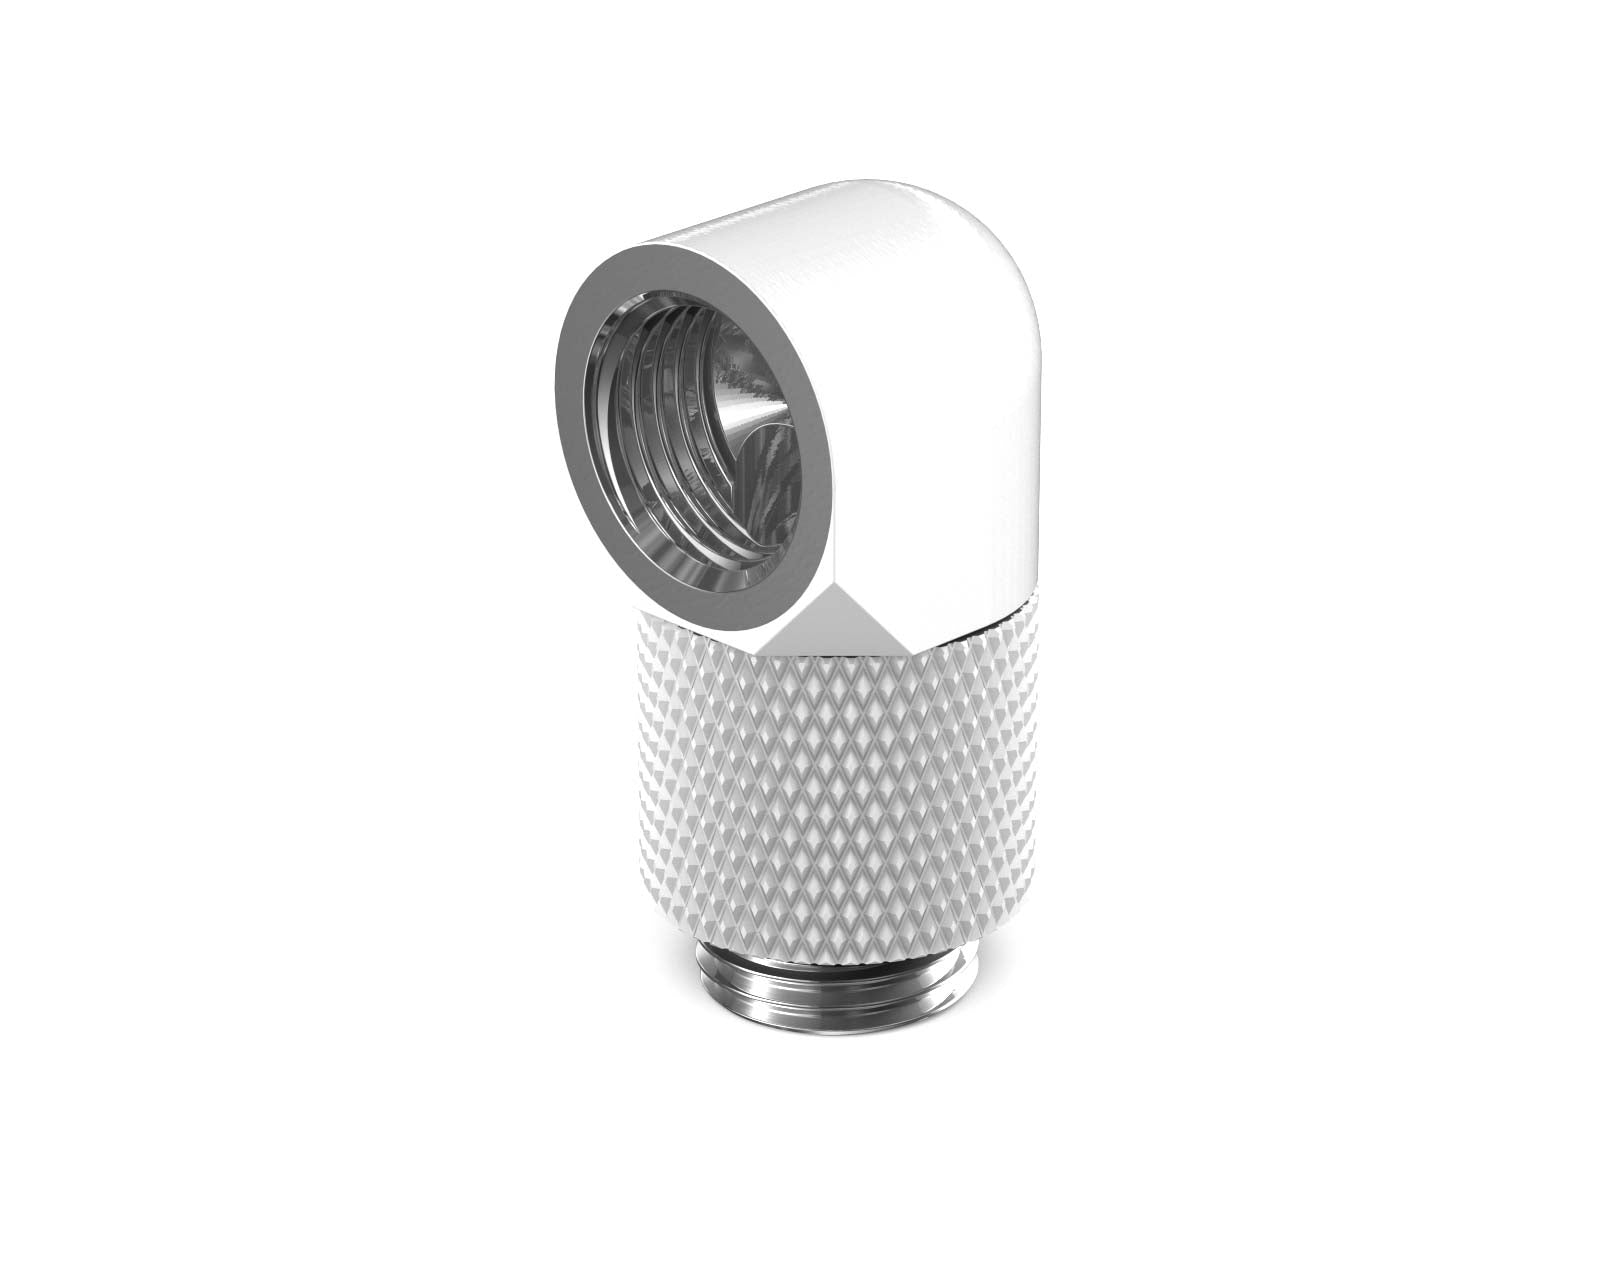 BSTOCK:PrimoChill Male to Female G 1/4in. 90 Degree SX Rotary 15mm Extension Elbow Fitting - Sky White - PrimoChill - KEEPING IT COOL